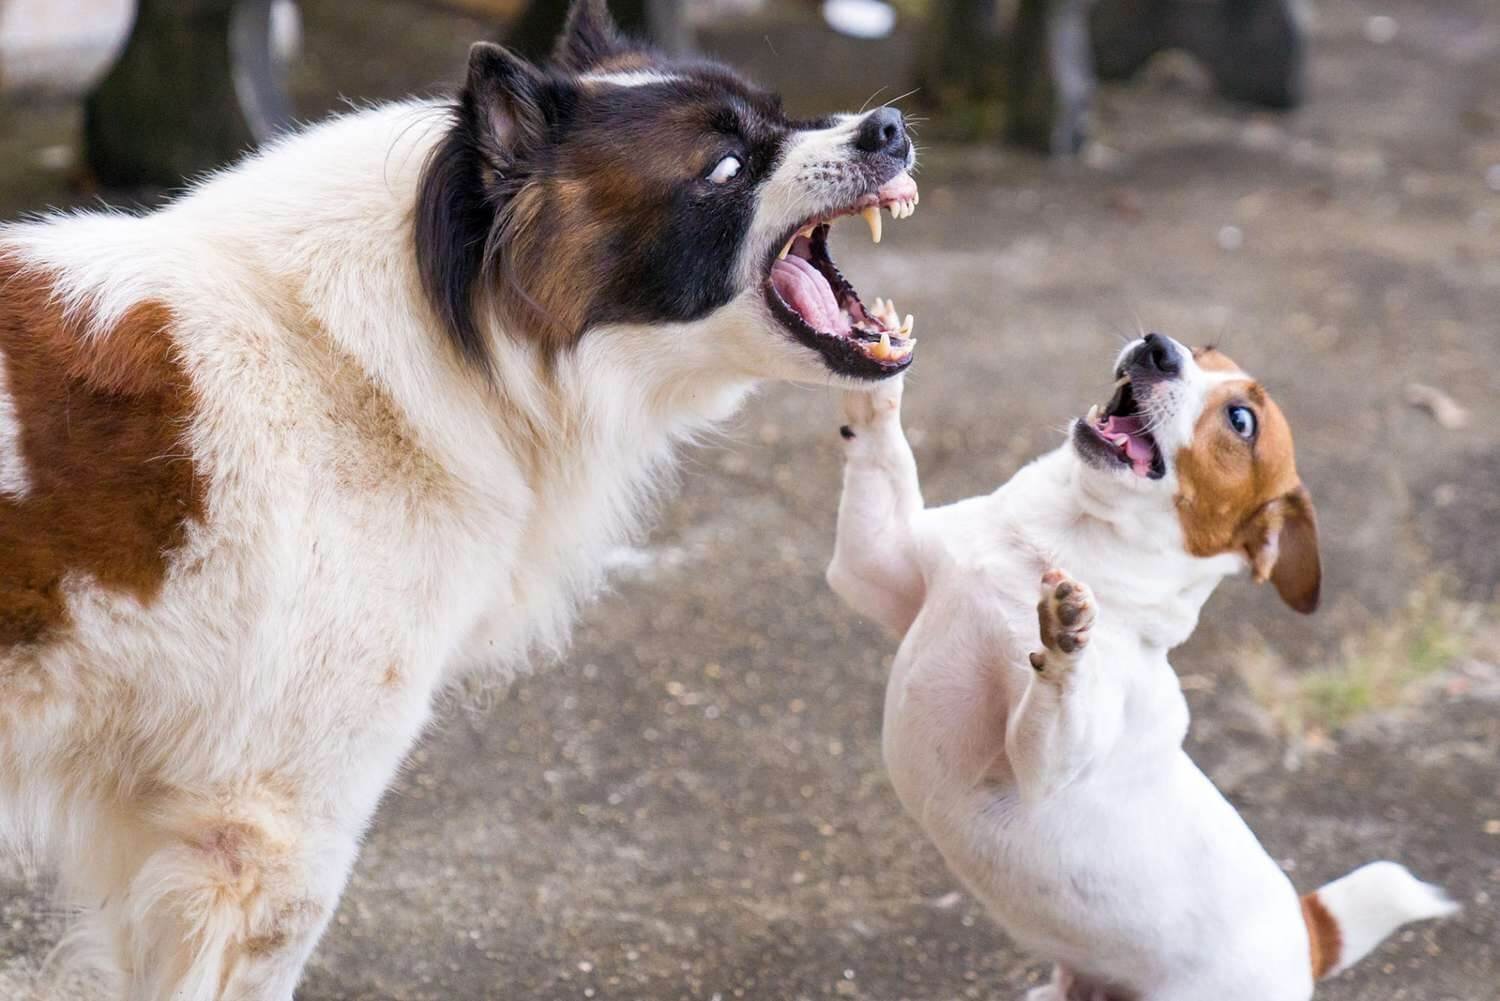 dog fights with other animals may lead to bite wounds.